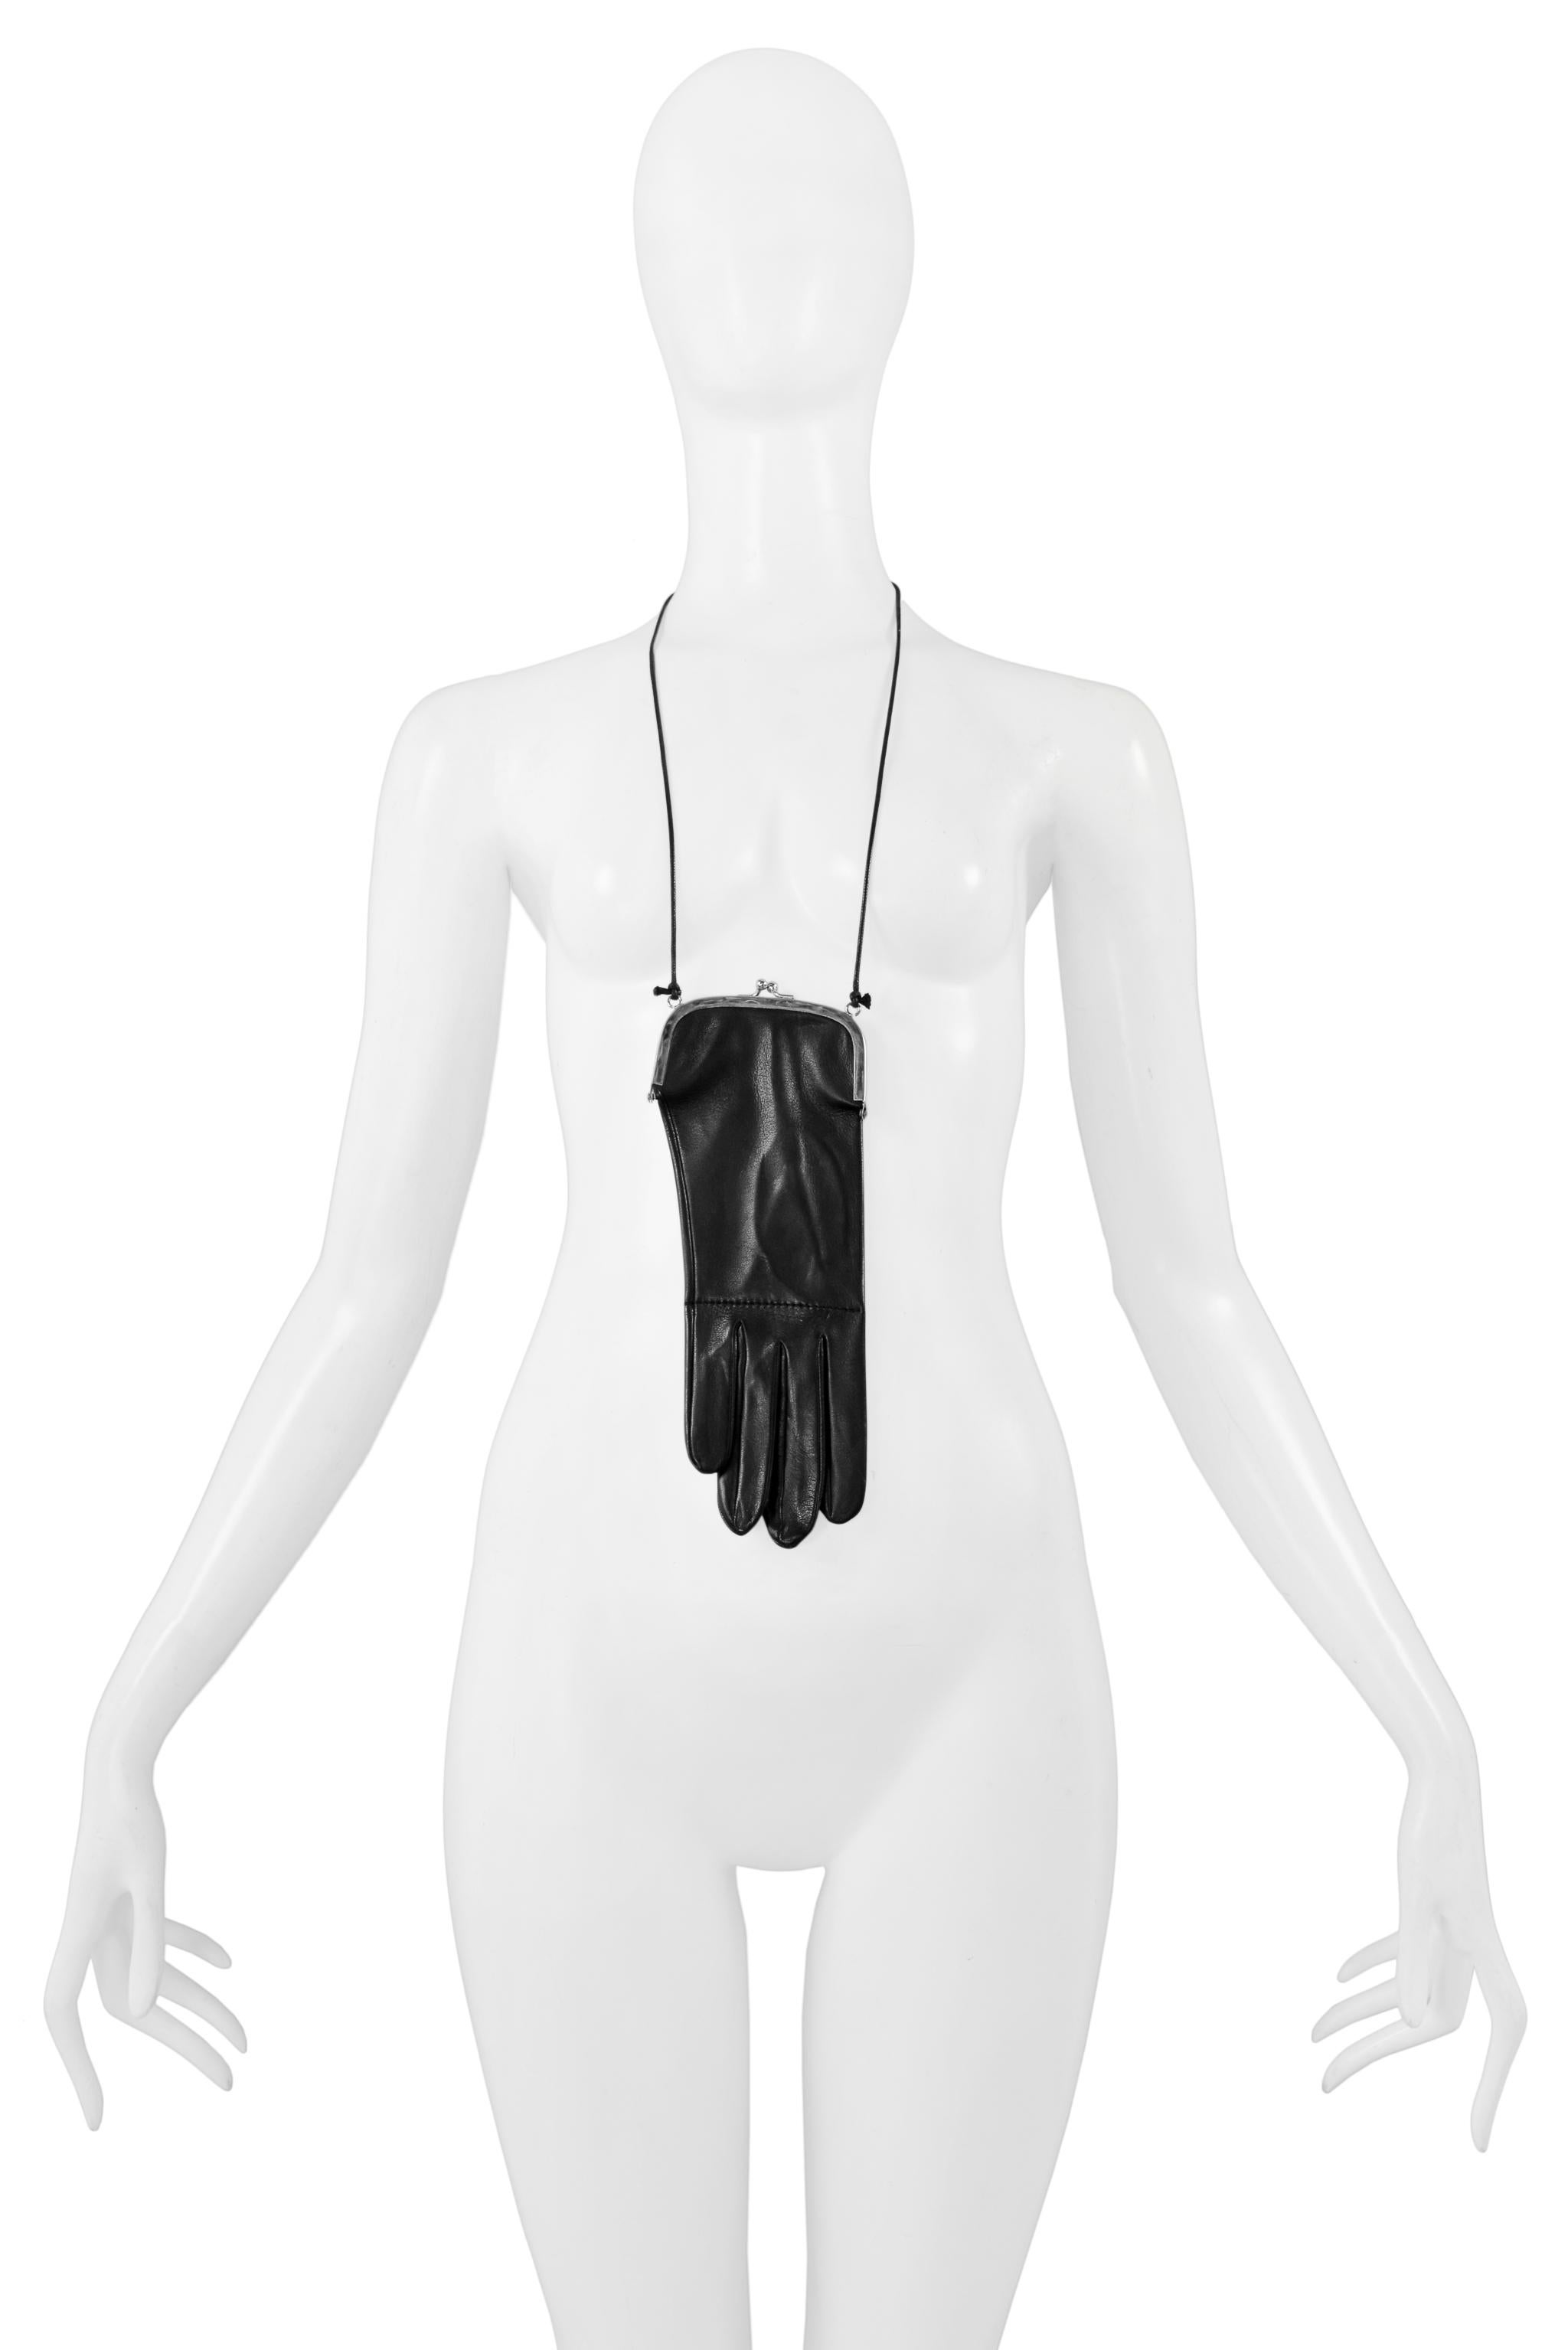 Resurrection Vintage is excited to offer a very rare vintage Maison Martin Margiela black leather glove that has been modified into a purse featuring a silver-tone metal frame and clasp. An attached black leather cord is fastened to each side so the